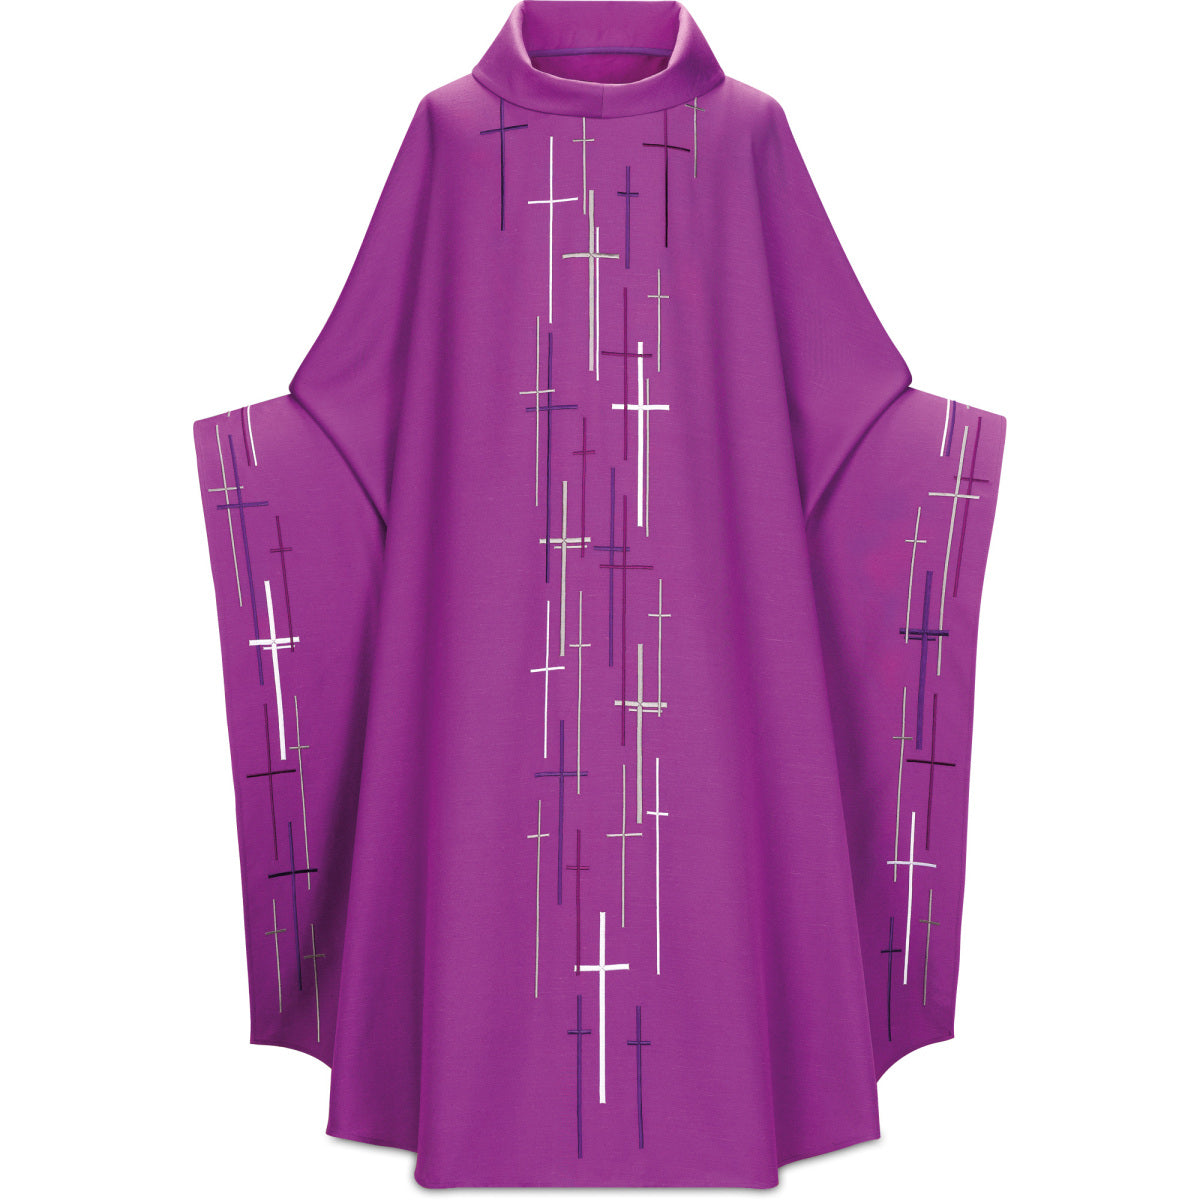 Priest Chasuble | Embroidered Crosses 5188